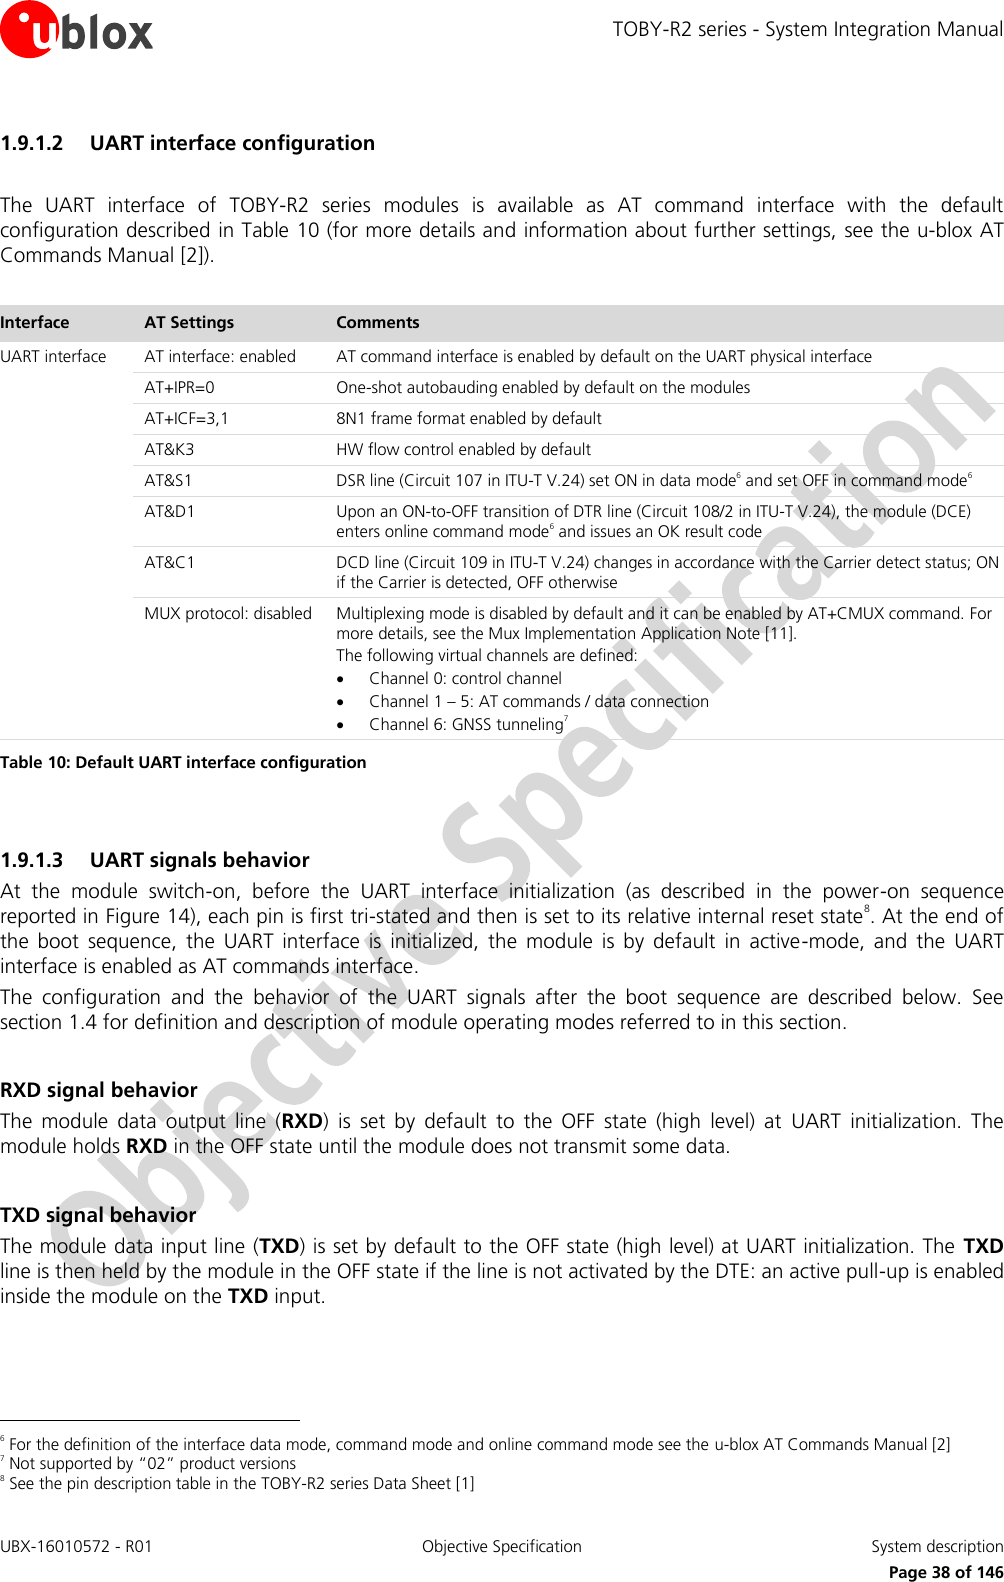 TOBY-R2 series - System Integration Manual UBX-16010572 - R01  Objective Specification  System description     Page 38 of 146 1.9.1.2 UART interface configuration  The  UART  interface  of  TOBY-R2  series  modules  is  available  as  AT  command  interface  with  the  default configuration described in Table 10 (for more details and information about further settings, see the u-blox AT Commands Manual [2]).  Interface AT Settings Comments UART interface AT interface: enabled AT command interface is enabled by default on the UART physical interface  AT+IPR=0 One-shot autobauding enabled by default on the modules  AT+ICF=3,1 8N1 frame format enabled by default  AT&amp;K3 HW flow control enabled by default  AT&amp;S1 DSR line (Circuit 107 in ITU-T V.24) set ON in data mode6 and set OFF in command mode6  AT&amp;D1 Upon an ON-to-OFF transition of DTR line (Circuit 108/2 in ITU-T V.24), the module (DCE) enters online command mode6 and issues an OK result code  AT&amp;C1 DCD line (Circuit 109 in ITU-T V.24) changes in accordance with the Carrier detect status; ON if the Carrier is detected, OFF otherwise  MUX protocol: disabled Multiplexing mode is disabled by default and it can be enabled by AT+CMUX command. For more details, see the Mux Implementation Application Note [11]. The following virtual channels are defined:  Channel 0: control channel  Channel 1 – 5: AT commands / data connection  Channel 6: GNSS tunneling7 Table 10: Default UART interface configuration  1.9.1.3 UART signals behavior At  the  module  switch-on,  before  the  UART  interface  initialization  (as  described  in  the  power-on  sequence reported in Figure 14), each pin is first tri-stated and then is set to its relative internal reset state8. At the end of the  boot  sequence,  the  UART  interface  is  initialized,  the  module  is  by  default  in  active-mode,  and  the  UART interface is enabled as AT commands interface. The  configuration  and  the  behavior  of  the  UART  signals  after  the  boot  sequence  are  described  below.  See section 1.4 for definition and description of module operating modes referred to in this section.  RXD signal behavior The  module  data  output  line  (RXD)  is  set  by  default  to  the  OFF  state  (high  level)  at  UART  initialization.  The module holds RXD in the OFF state until the module does not transmit some data.  TXD signal behavior The module data input line (TXD) is set by default to the OFF state (high level) at UART initialization. The  TXD line is then held by the module in the OFF state if the line is not activated by the DTE: an active pull-up is enabled inside the module on the TXD input.                                                        6 For the definition of the interface data mode, command mode and online command mode see the u-blox AT Commands Manual [2] 7 Not supported by “02” product versions 8 See the pin description table in the TOBY-R2 series Data Sheet [1] 